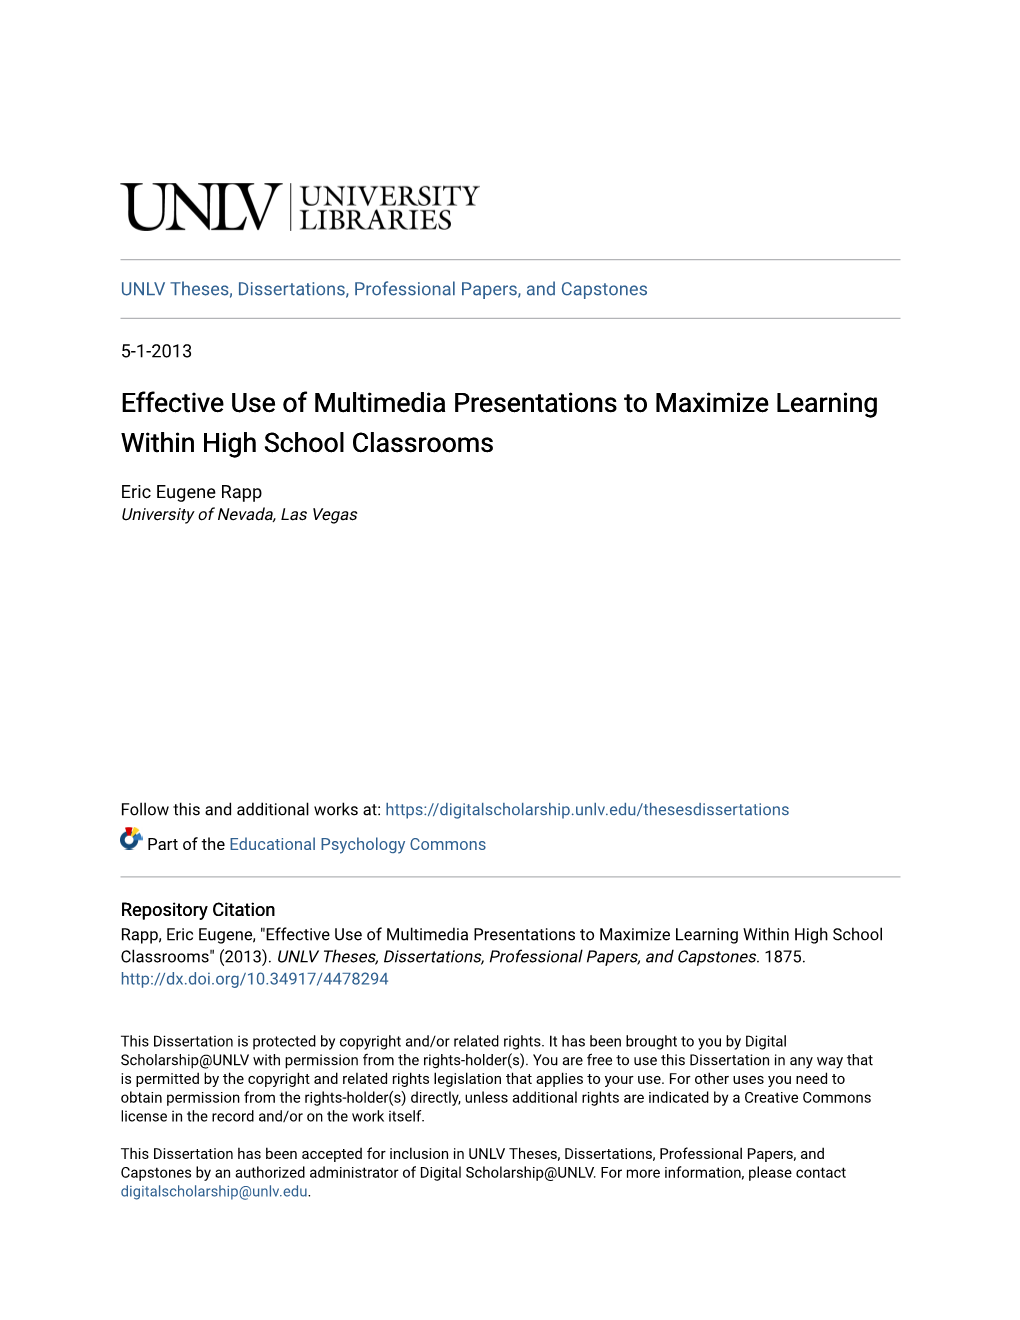 Effective Use of Multimedia Presentations to Maximize Learning Within High School Classrooms